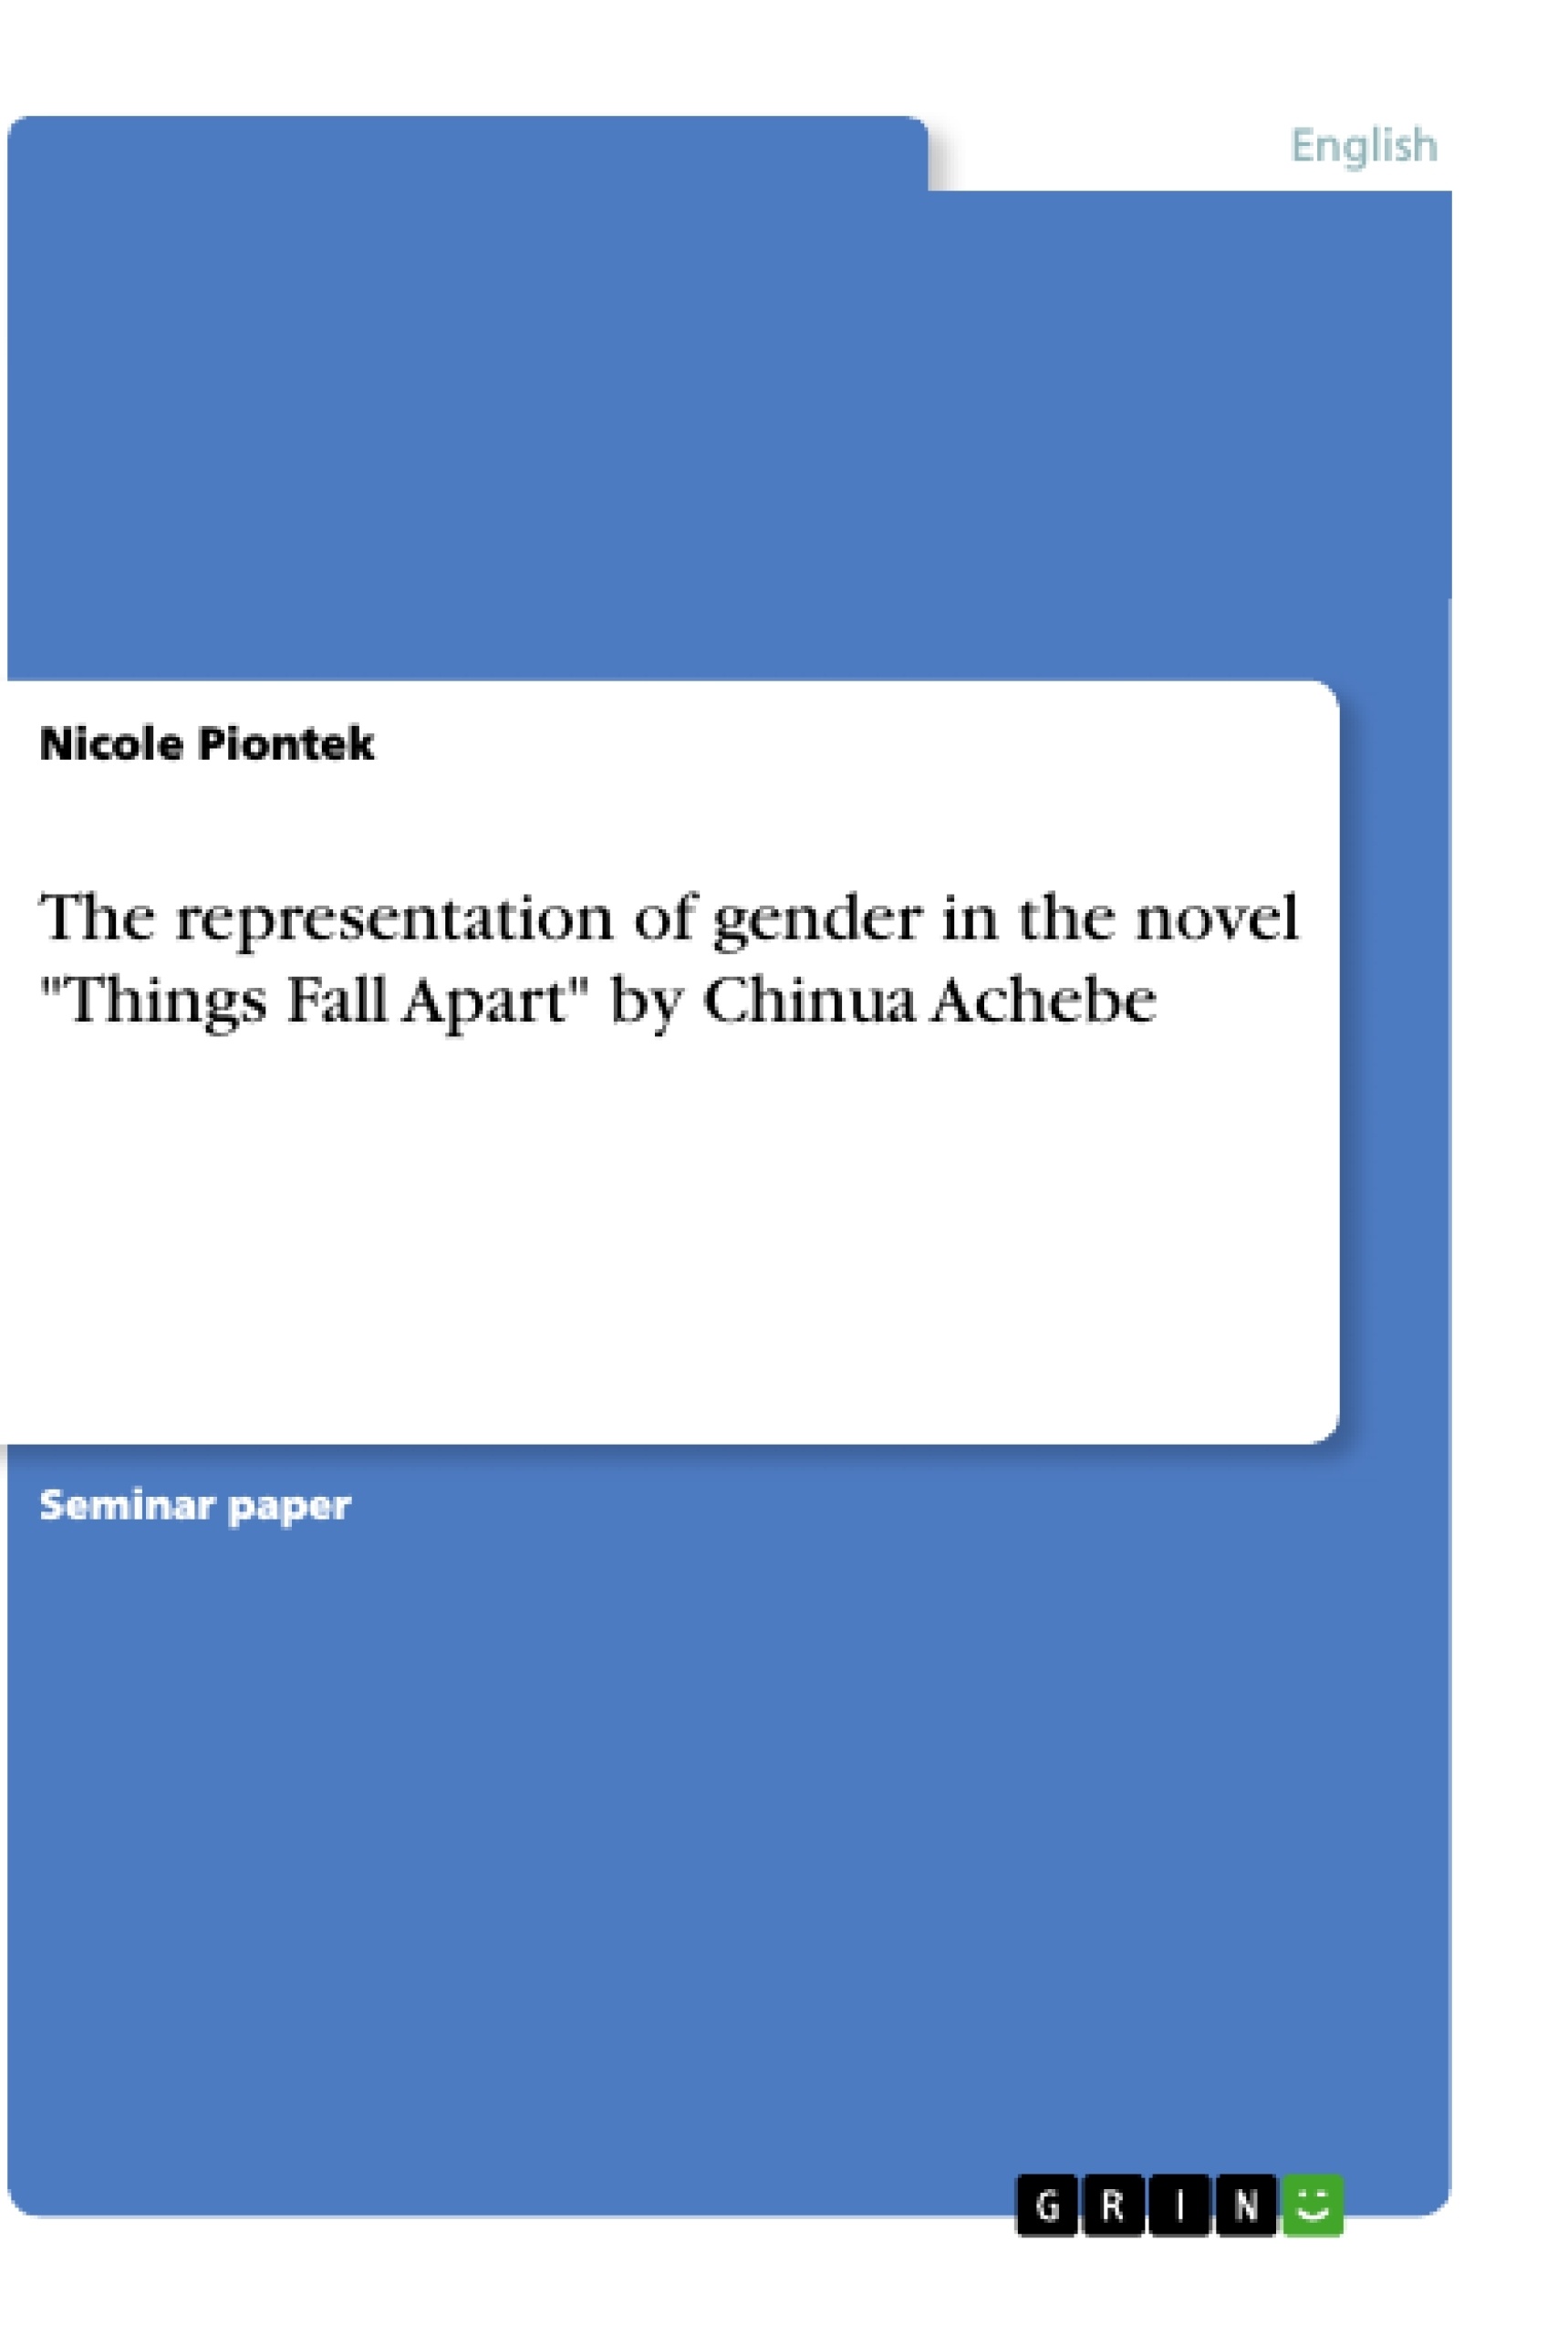 Title: The representation of gender in the novel "Things Fall Apart" by Chinua Achebe